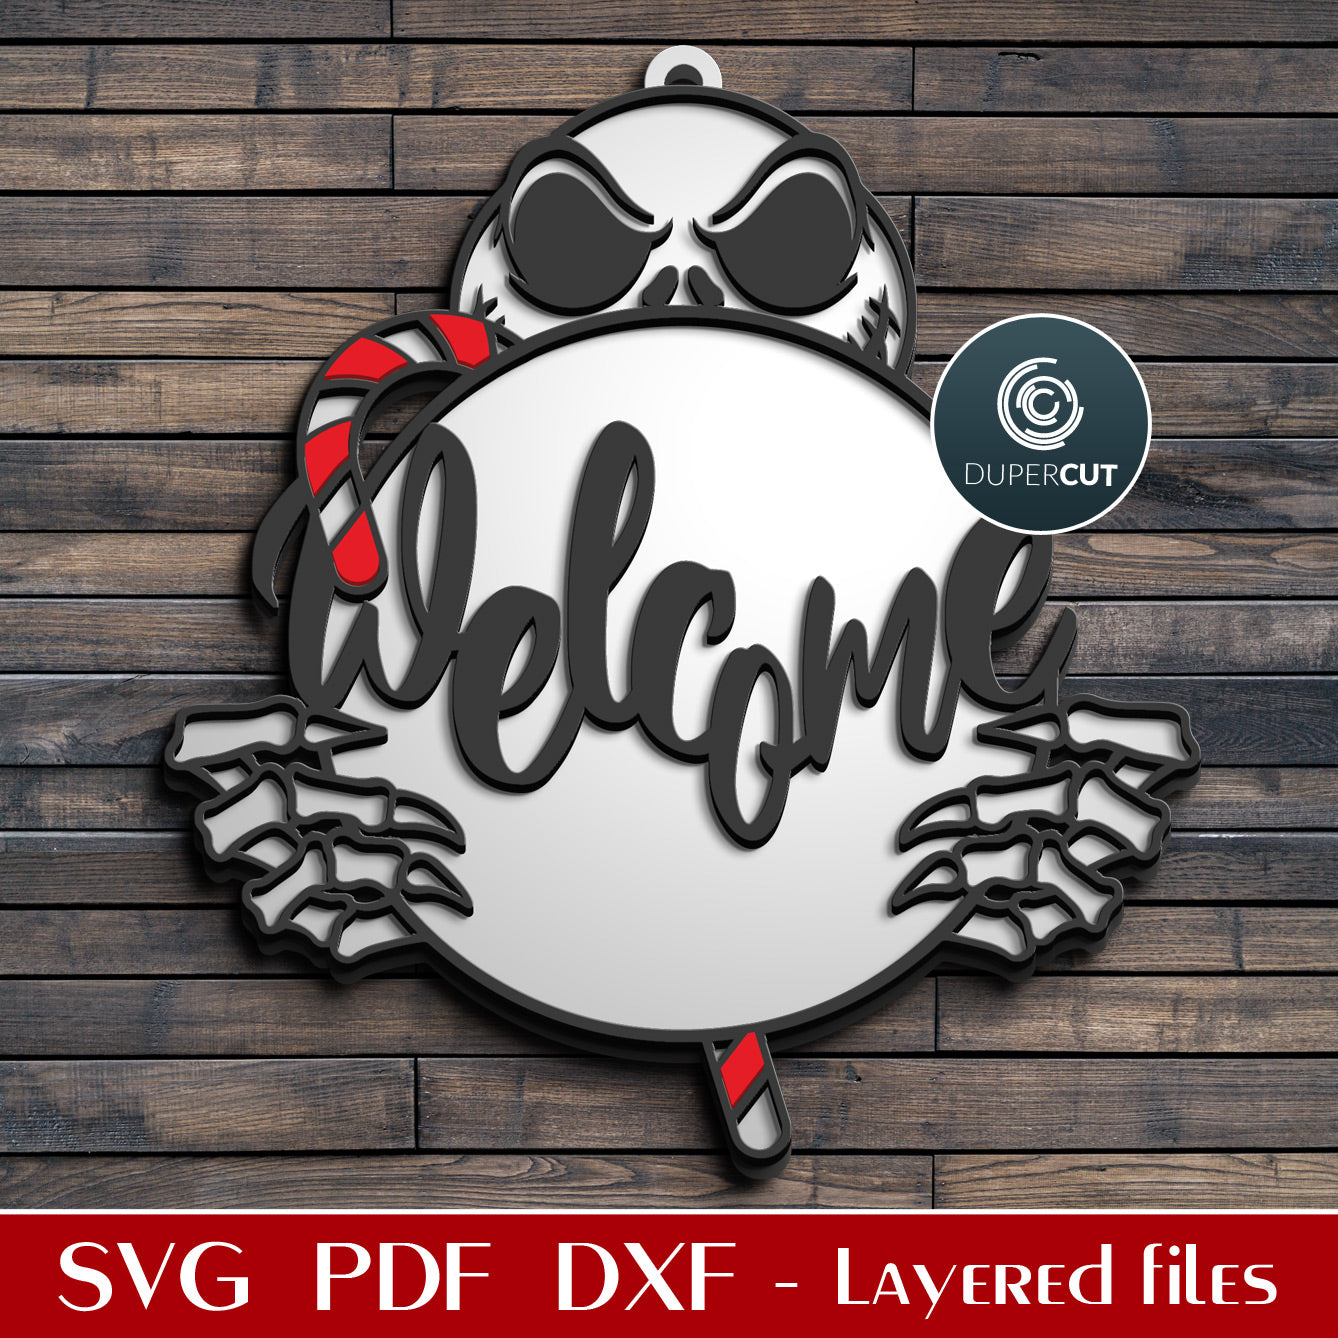 Christmas jack skellington welcome sign - SVG DXF laser cutting pattern files for scroll saw, Glowforge, Cricut, Silhouette cameo, CNC plasma machines by DuperCut